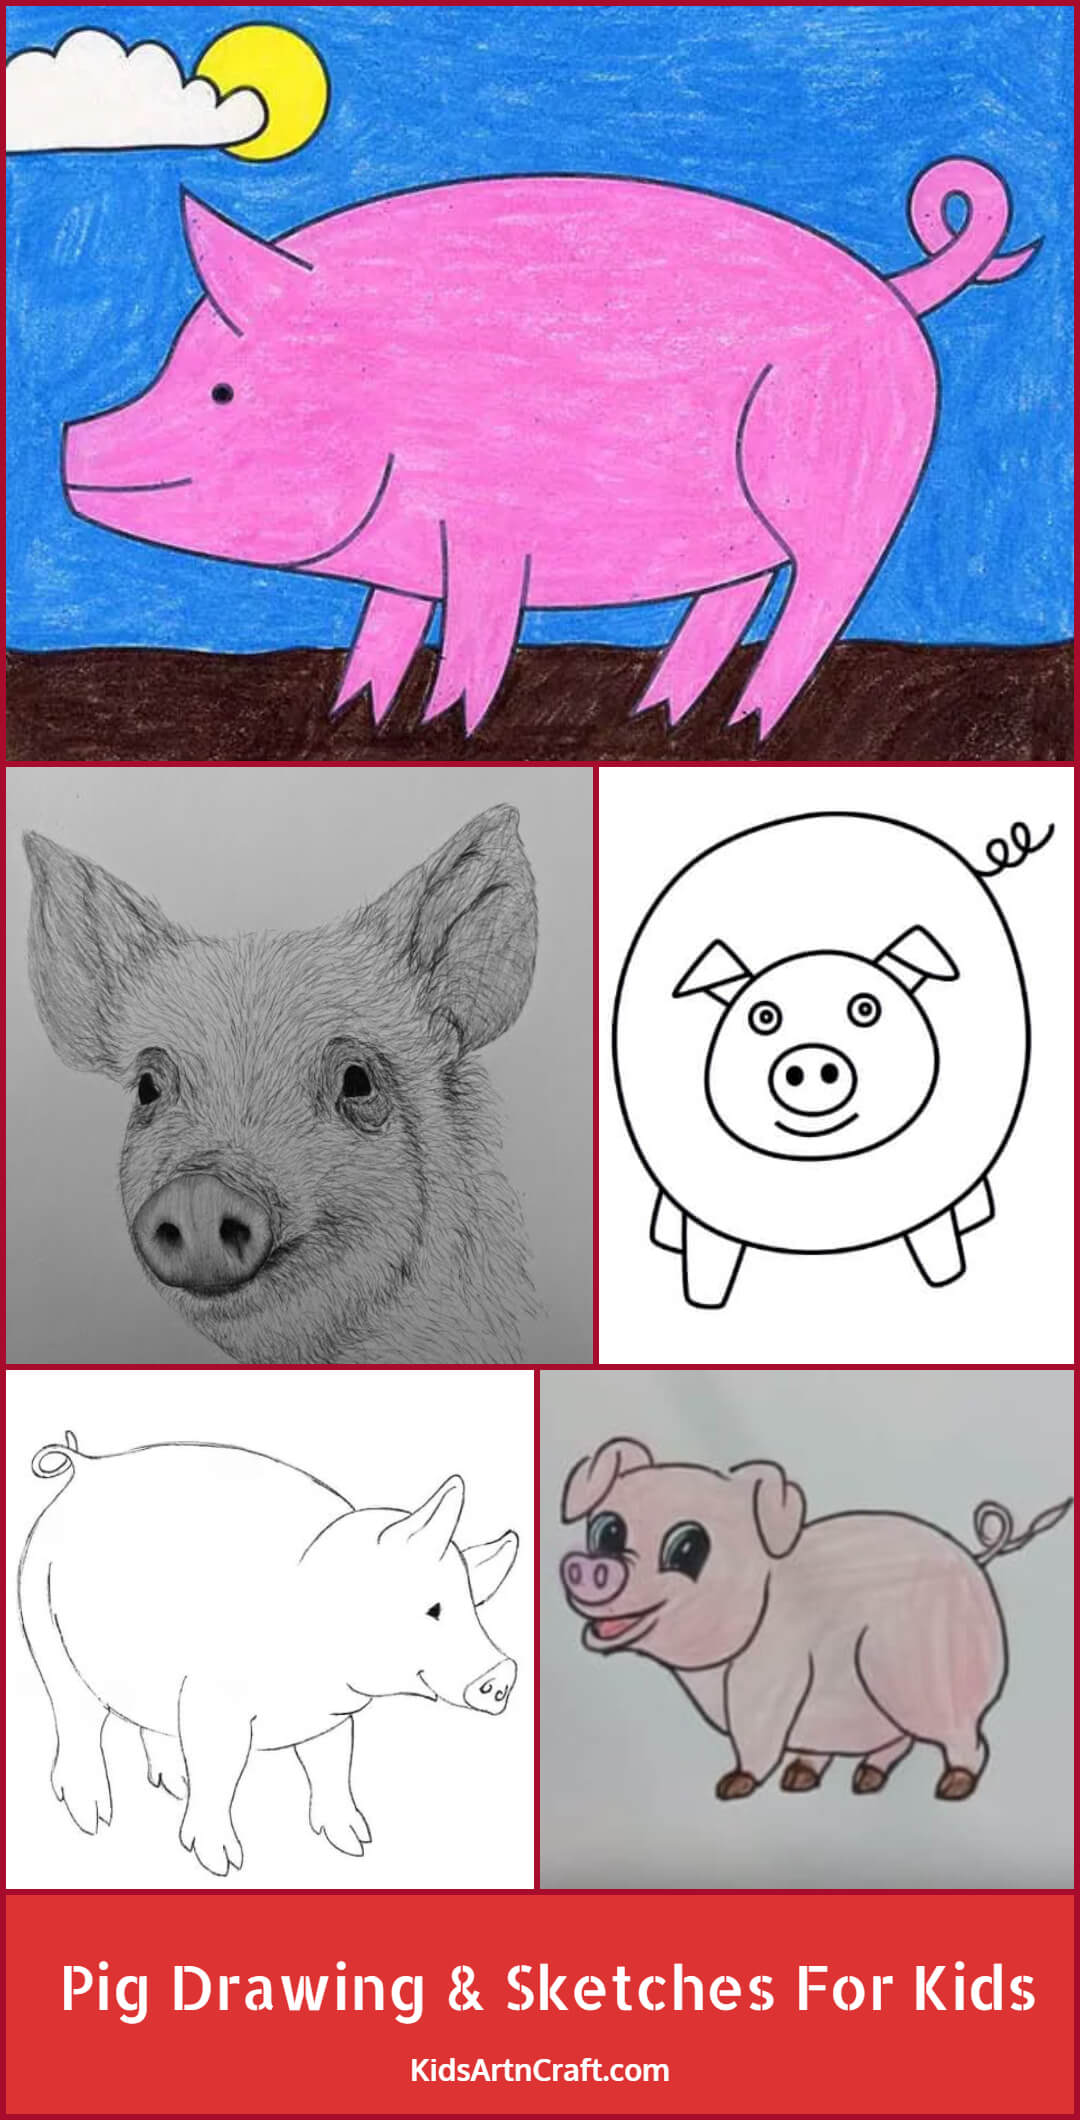 Pig Drawing & Sketches For Kids